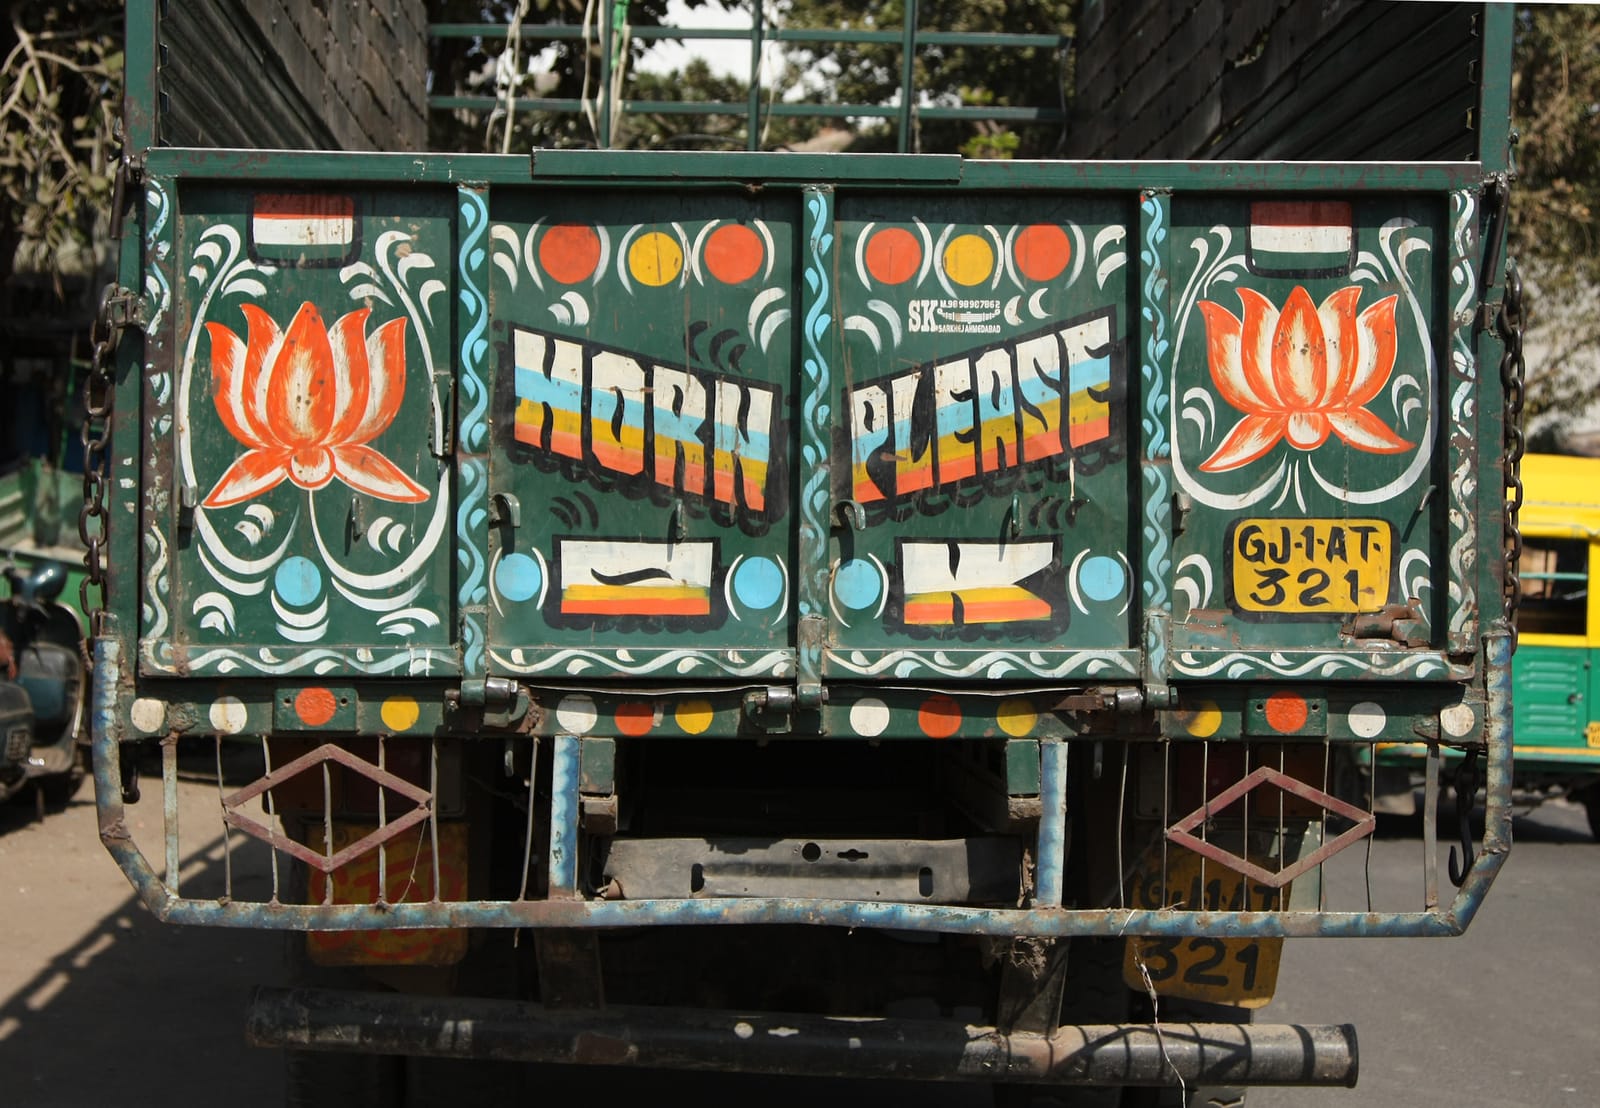 Rear and of a truck that is decorated with lotus flowers left and right, basic scrollwork, spots, and lettering in the middle that reads "horn please, OK".